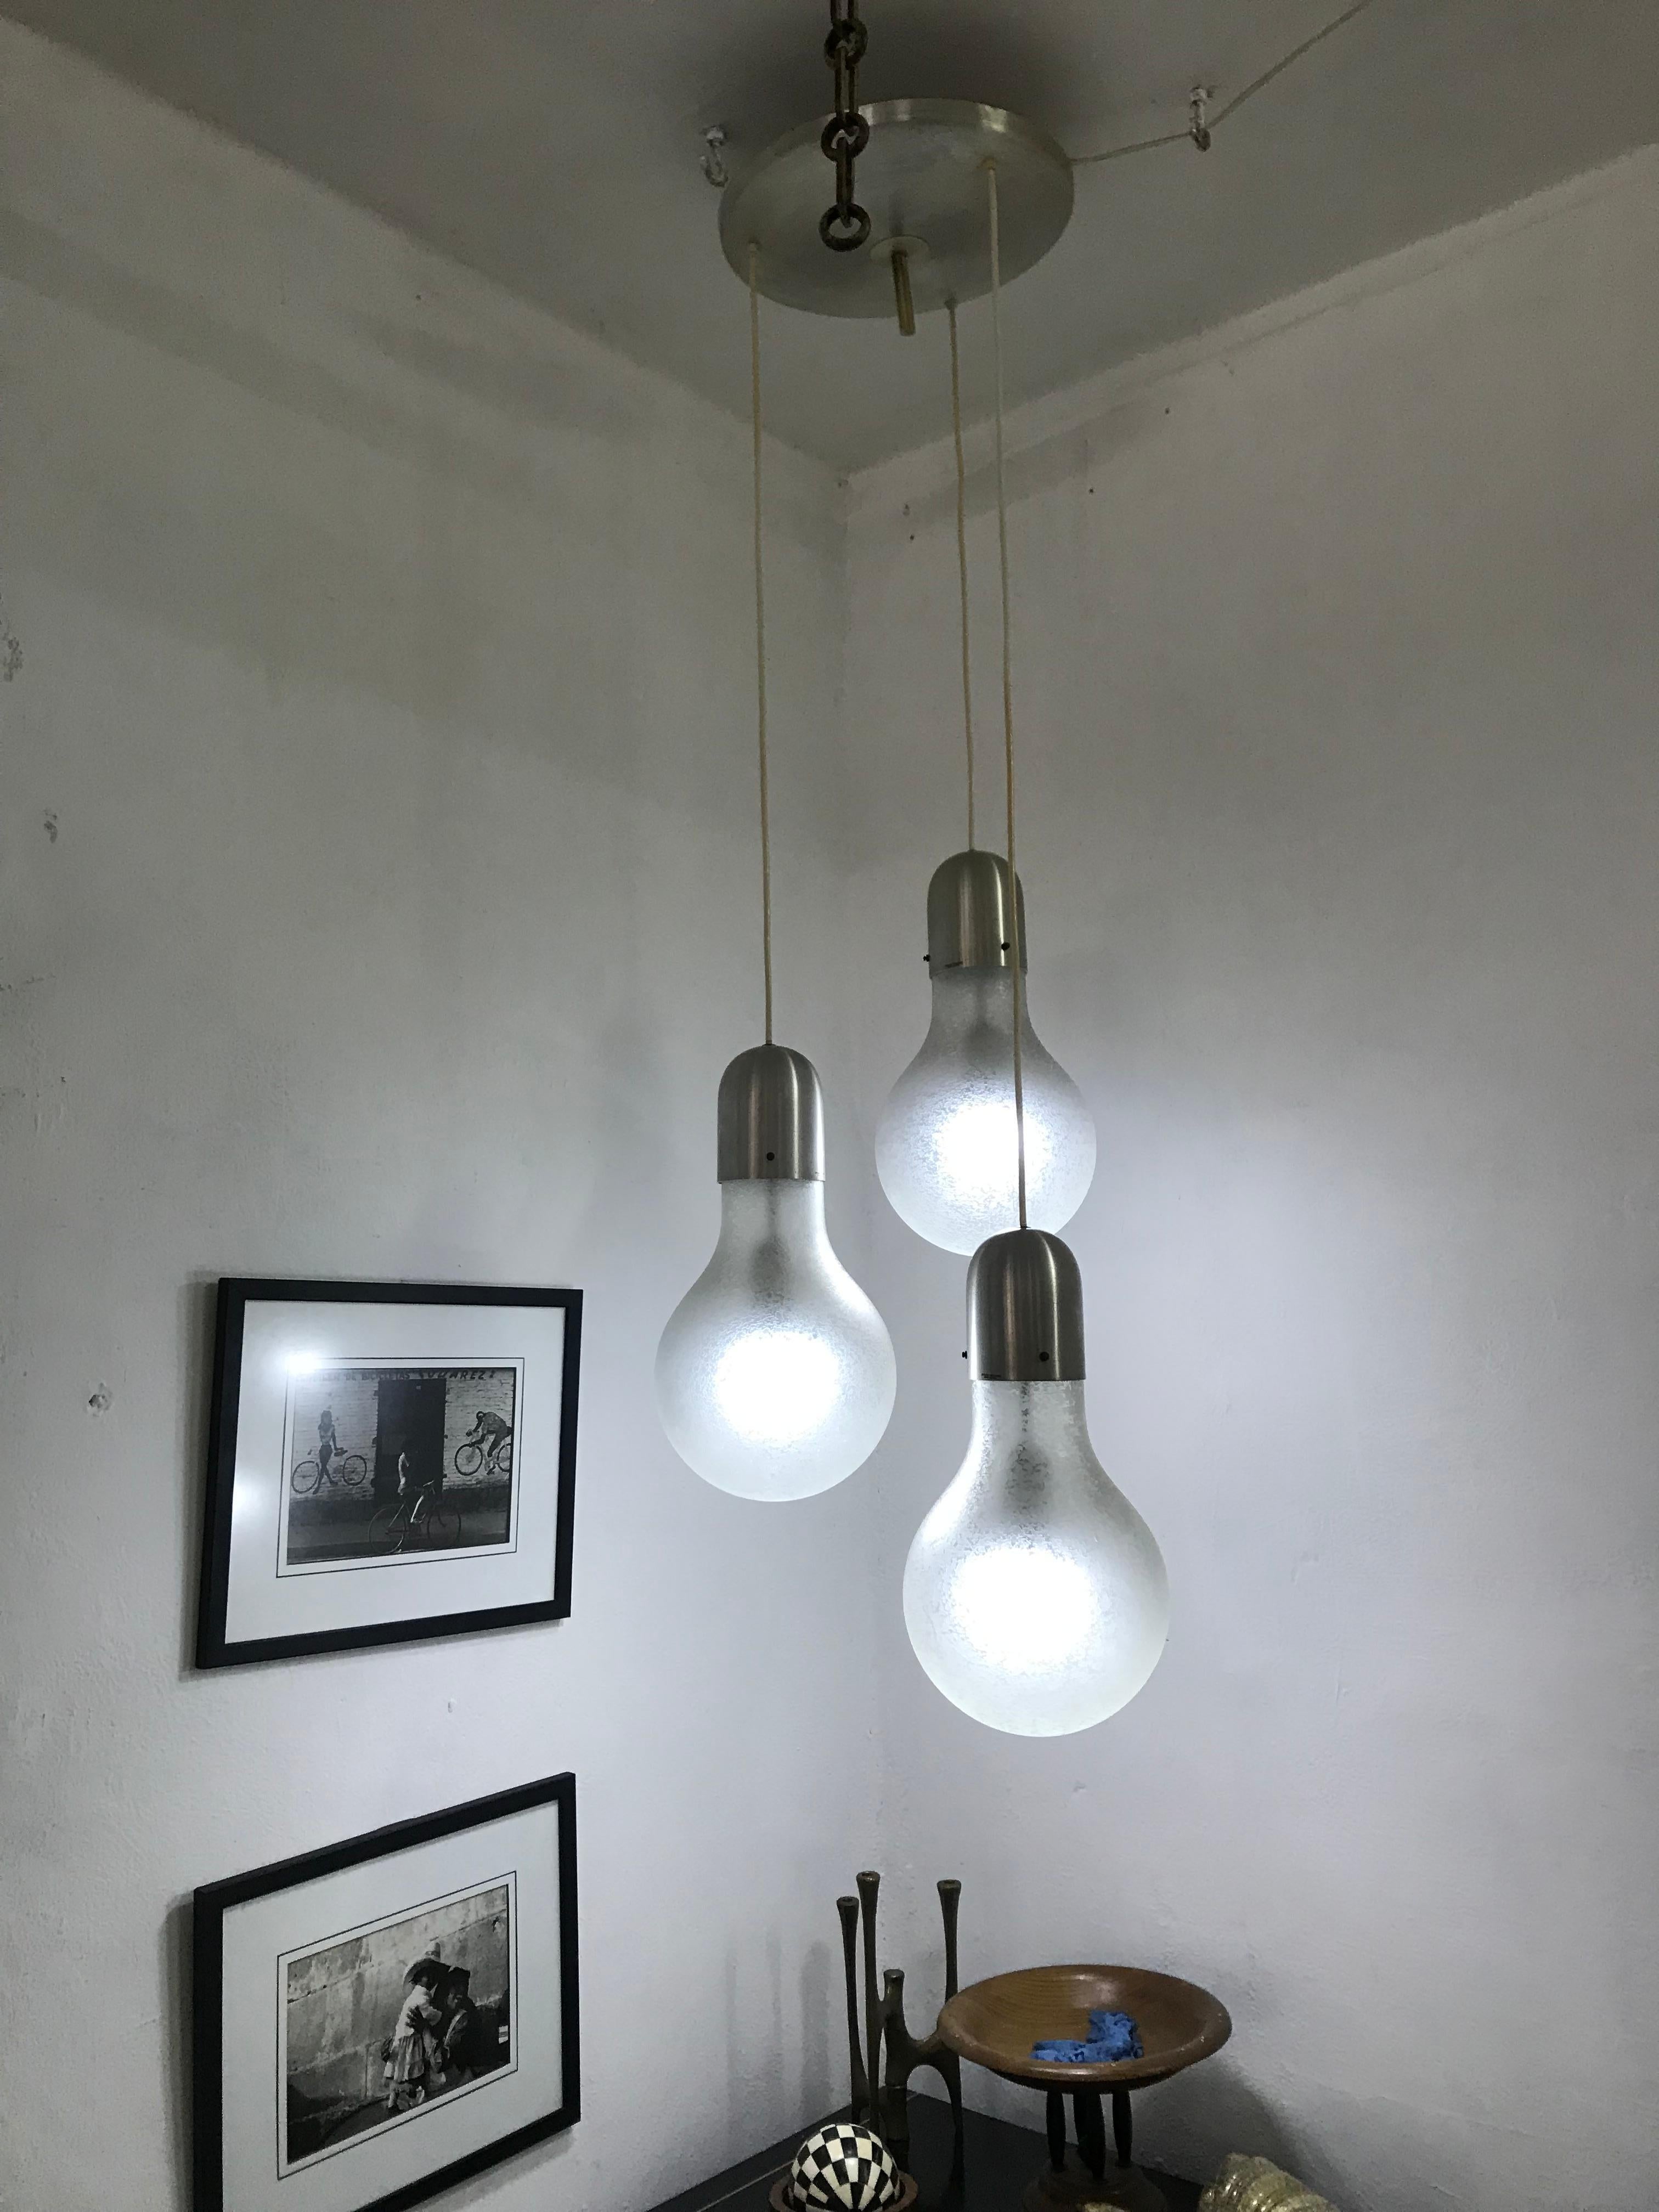 Mid-Centruy Modern chandelier consisting of 3 pendant lights in the shape of oversized light bulbs, manufactured by Stilux Milano in Italy ca. 1970s.
The globes are done in the 